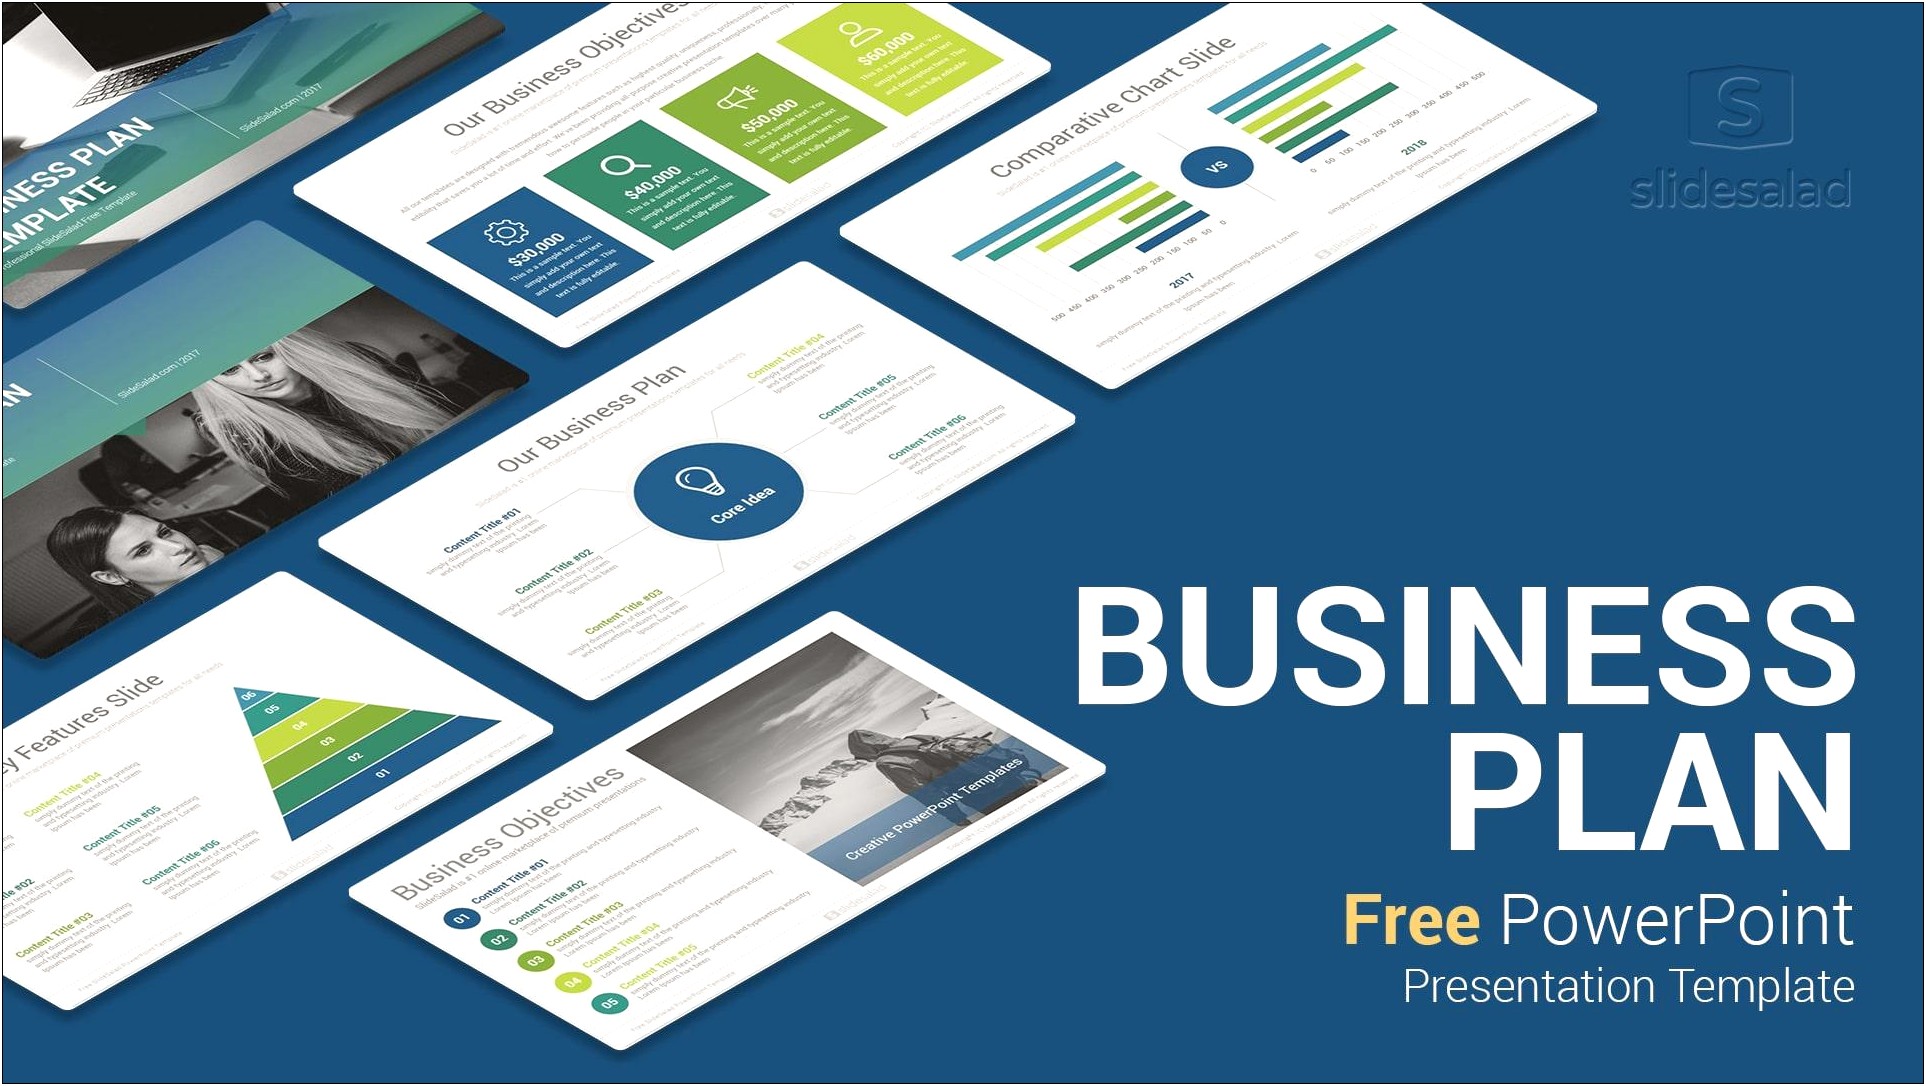 Professional Business Ppt Templates Free Download